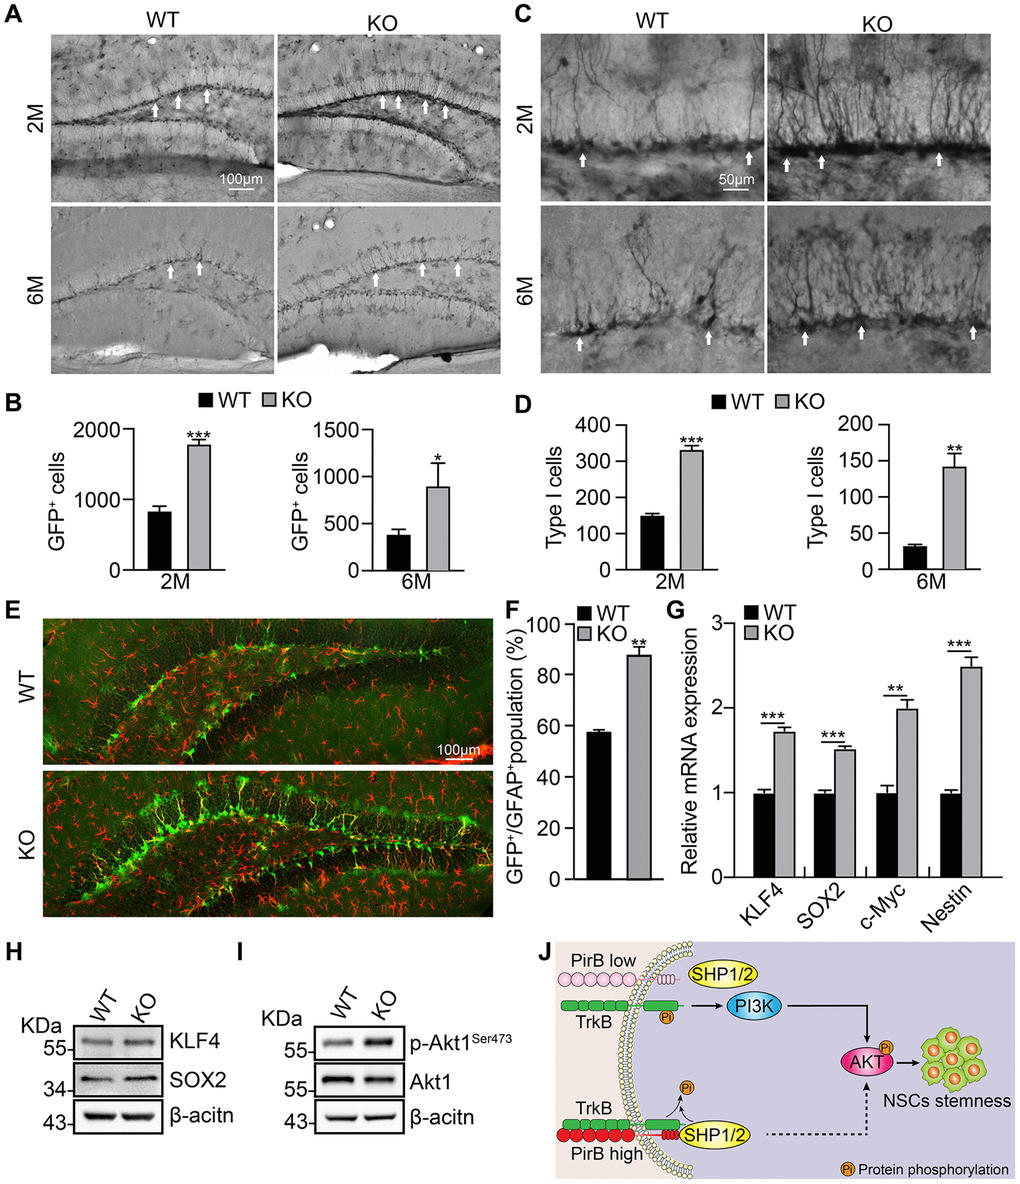 PirB depletion increases the NSC pool in vivo through Akt1 signaling. (A–B) Neural stem/progenitor cell (GFP-expressing cell) number quantified in the dentate gyrus of mice over time. n ≥ 3. (C–D) Type 1 cells (arrows) were increased in PirB-depleted mice compared with the wild-type control group; n ≥ 3. (E–F) PirB knockout increased Type 1 early progenitors in 2-month-old mice. (Green: GFP-positive; red: GFAP positive); n ≥ 3. (G) qRT-PCR relative mRNA expression of KLF4, SOX2, c-MYC, and Nestin. (H) Increases in stemness marker genes KLF4 and Sox2 were verified by western blot. (I) Akt1 phosphorylation was increased upon PirB depletion as shown by western blot. (J) Working model for PirB in NSCs. PirB deficiency promotes Akt1 phosphorylation through reducing recruitment and binding of Src homology 2-containing protein tyrosine phosphatase (SHP)-1 and SHP-2 to inactivate TrkB. This results in constitutive activation of the Akt1 signaling pathway and increased NSC self-renewal. Means ± SEM, *P **P ***P t-test.